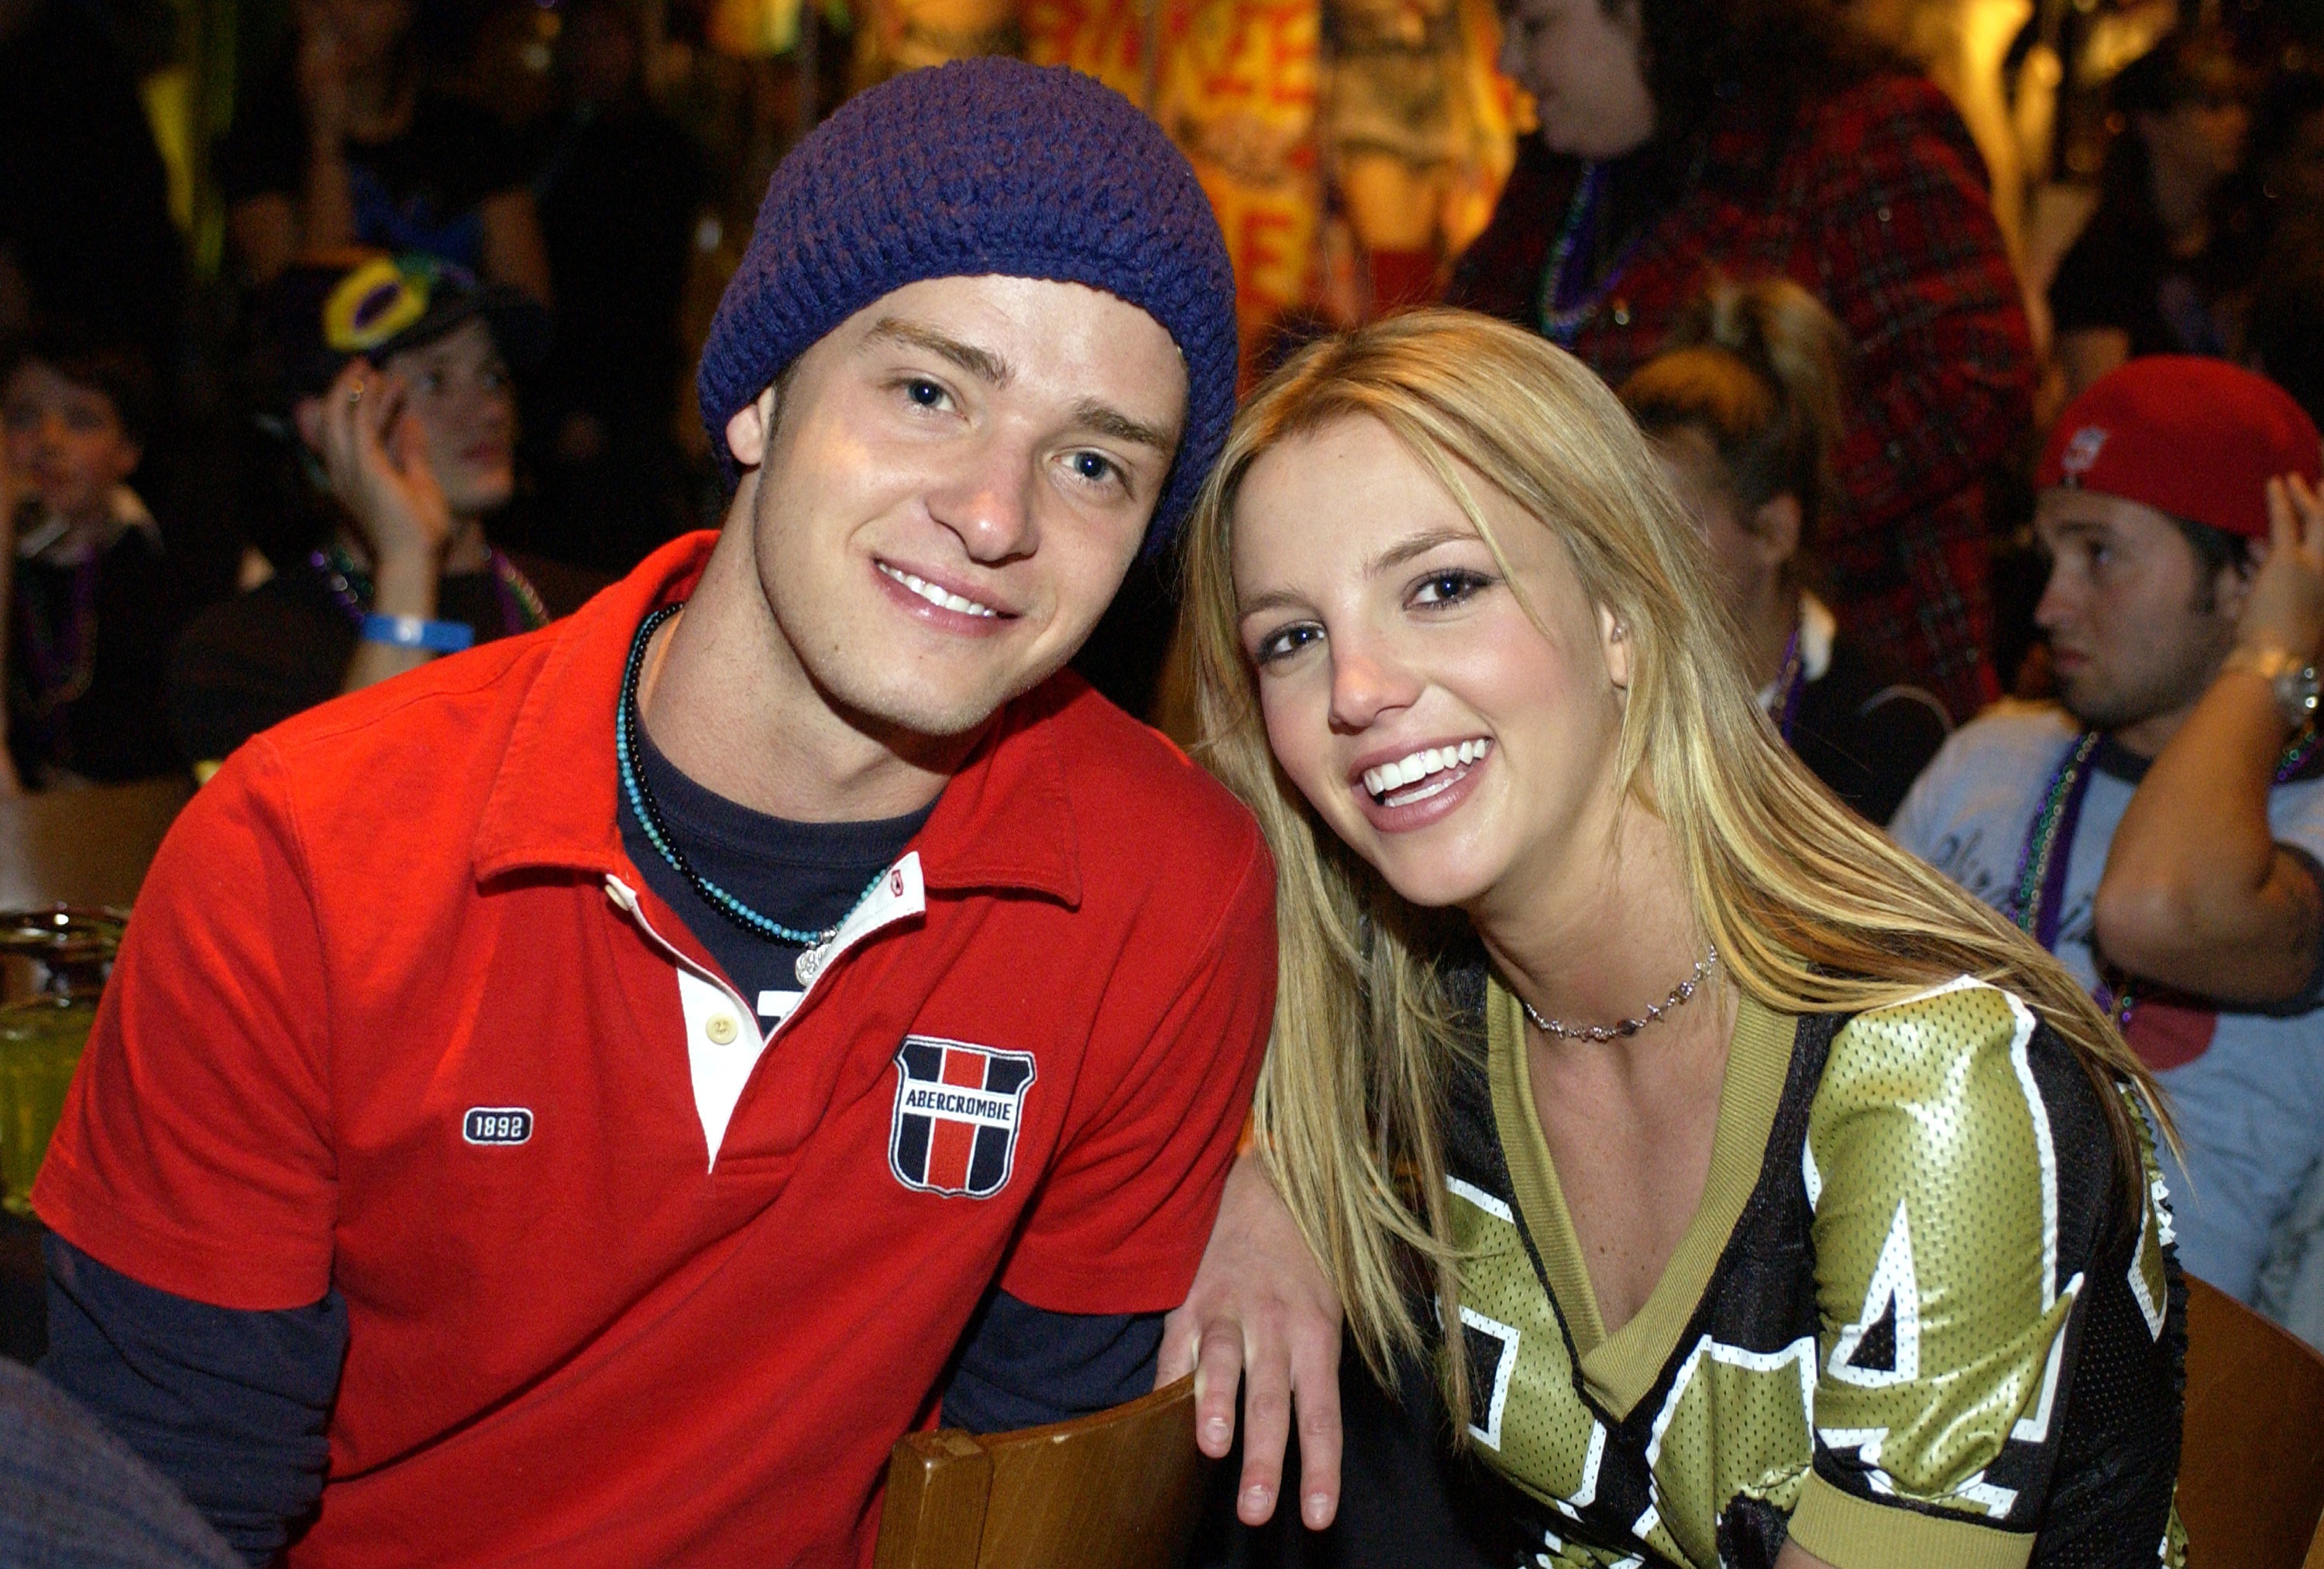 Justin Timberlake and Britney Spears pose for a picture together during an event for Super Bowl XXXVI 